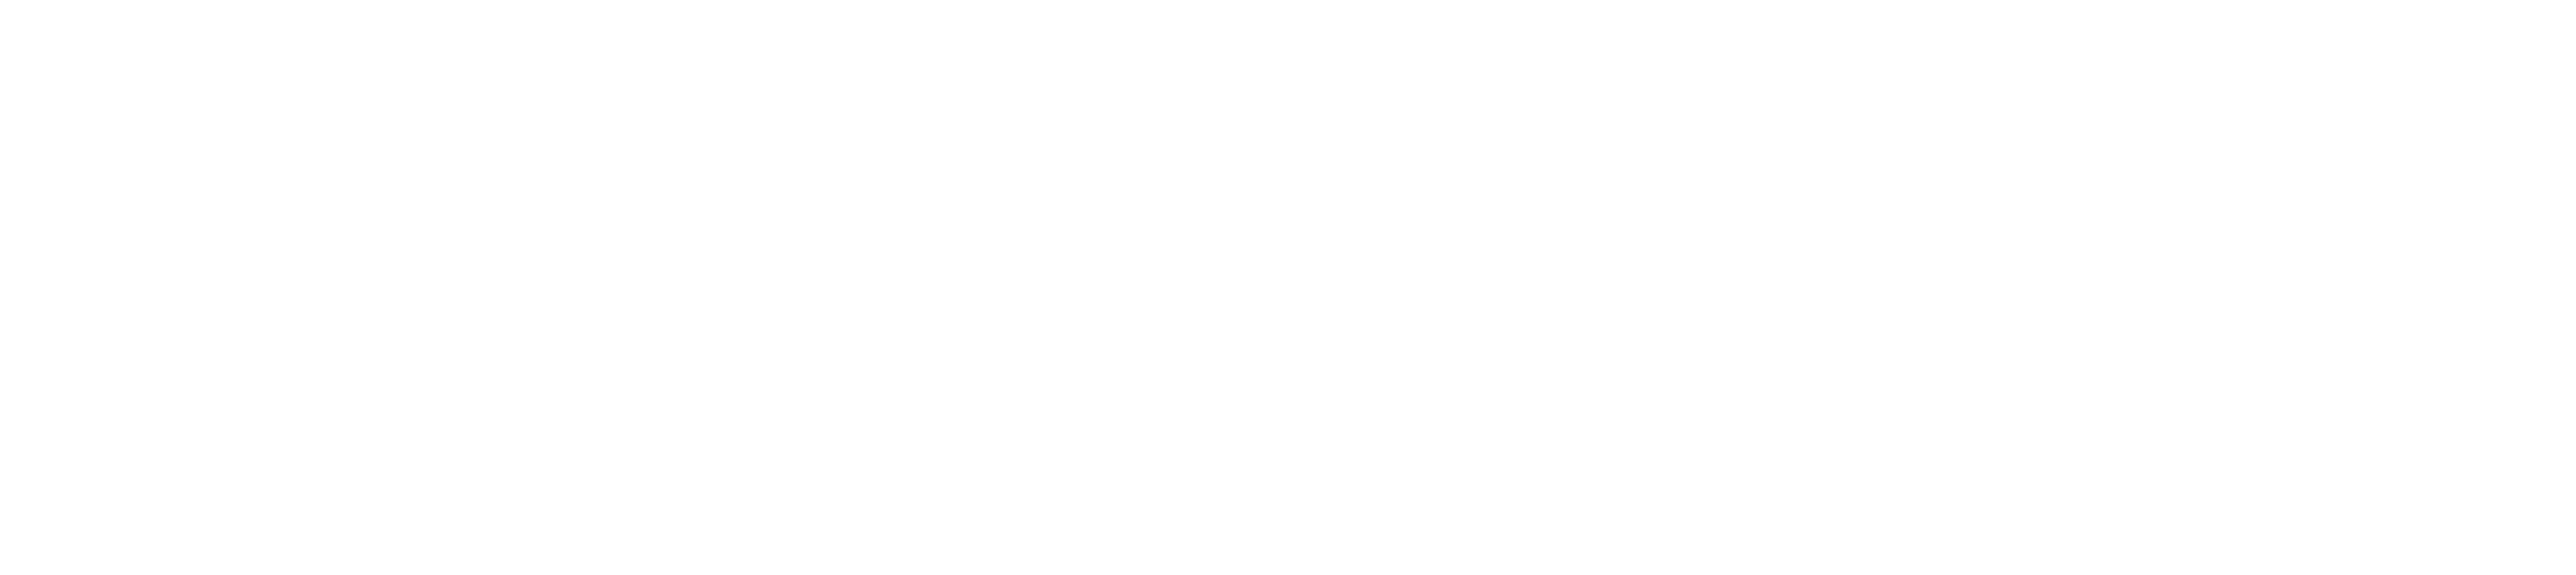 YT white png 